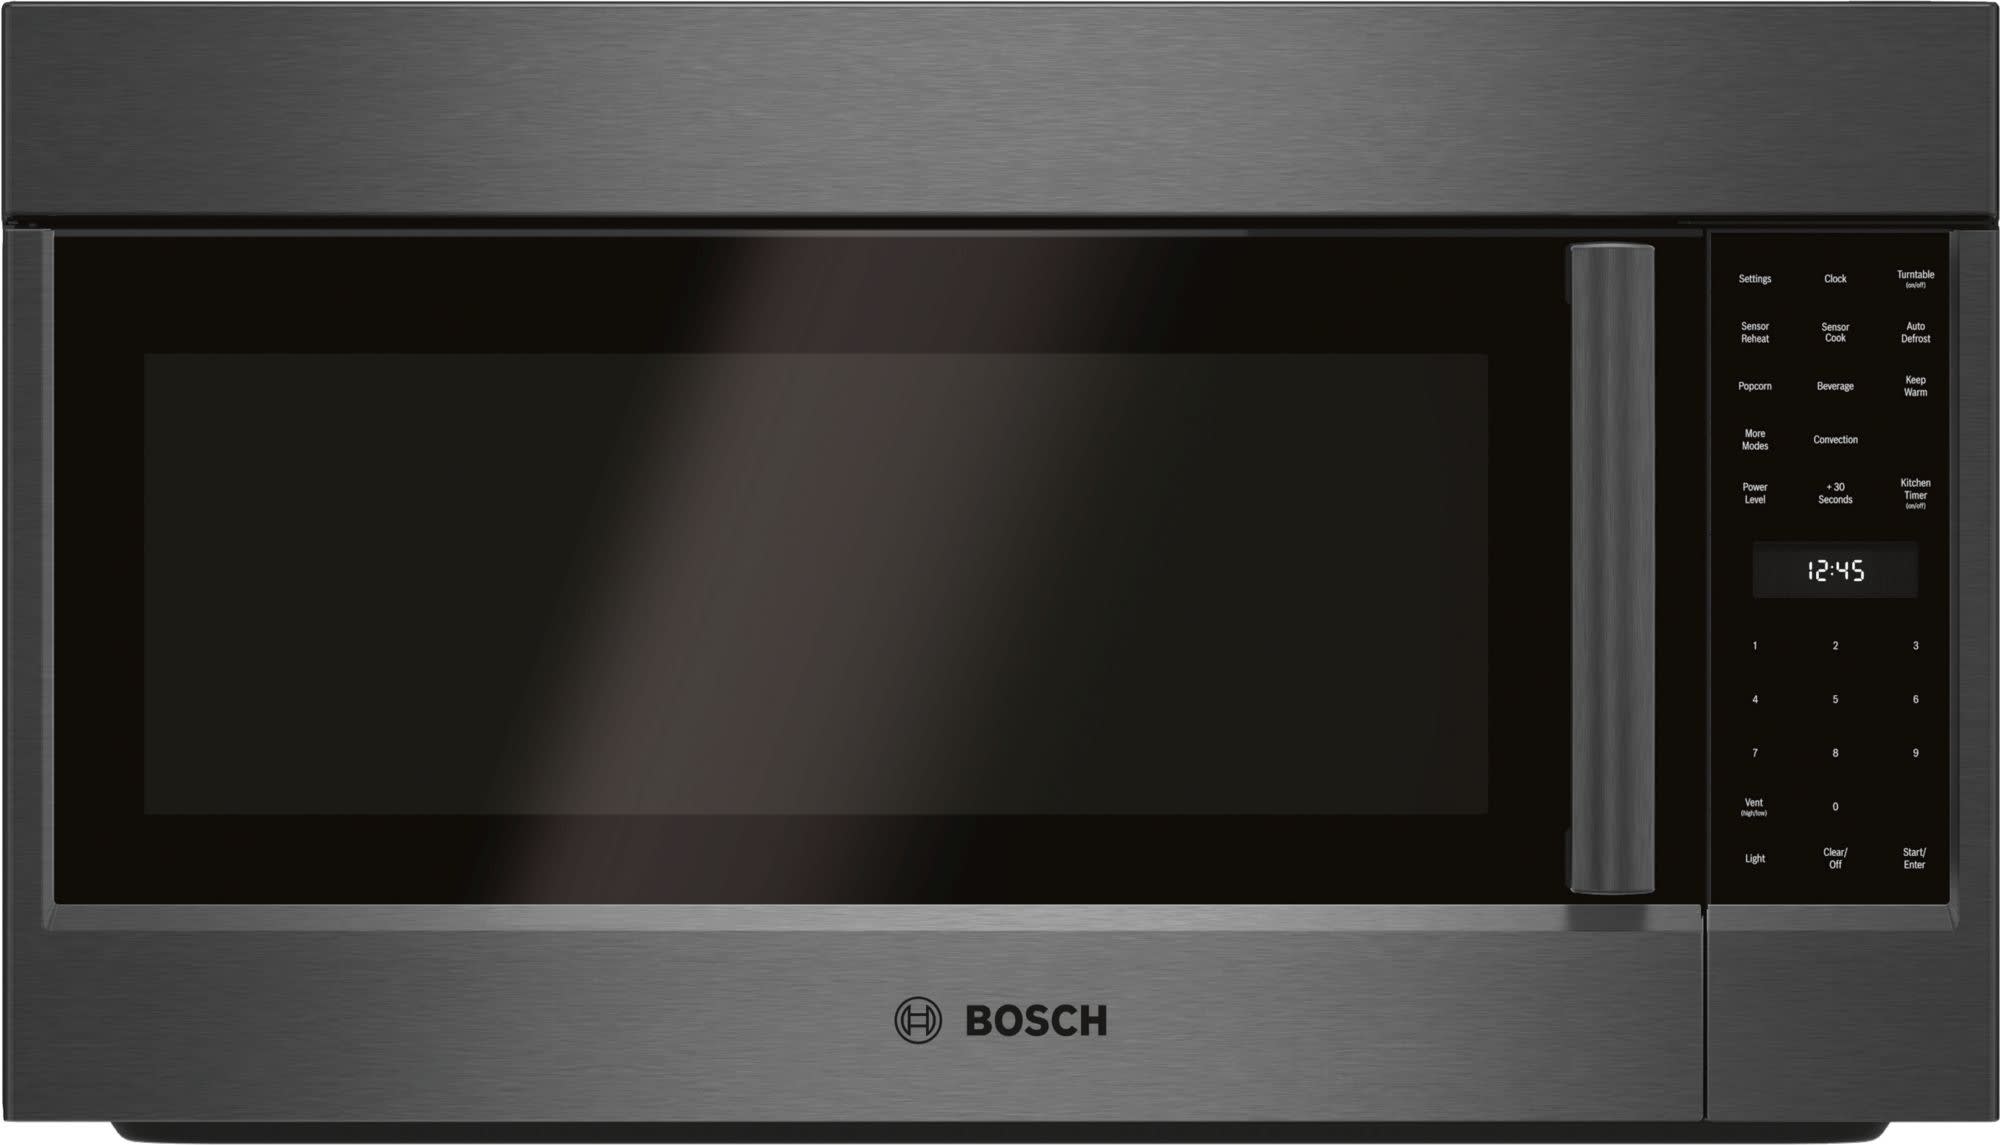 Bosch NET8069UC 30 Inch Electric Cooktop with 4 Elements, Ceramic